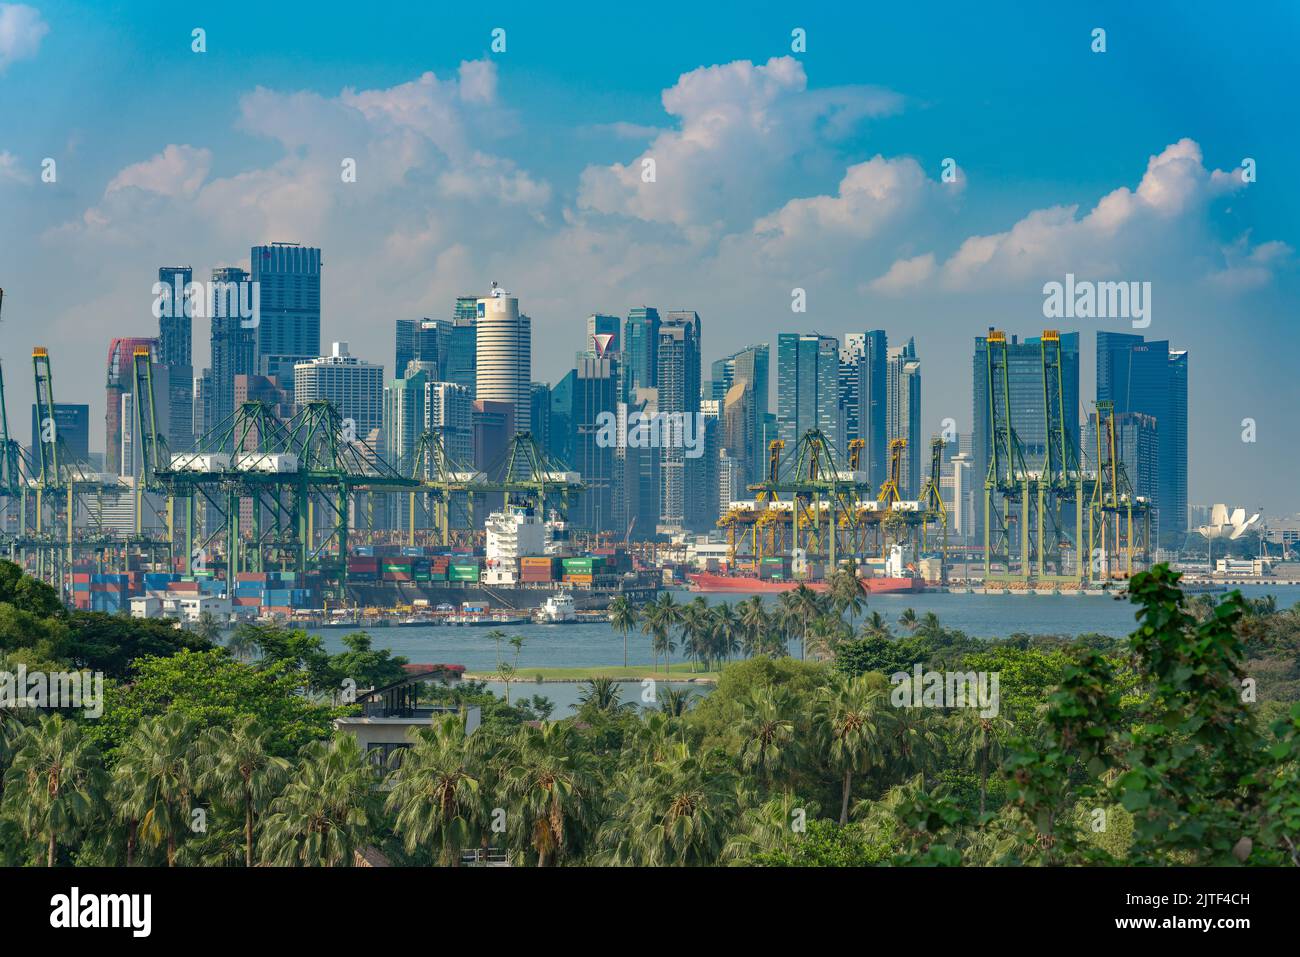 Singapore - 2 Oct, 2018: View towards the container harbour with palm trees in the foreground. Stock Photo